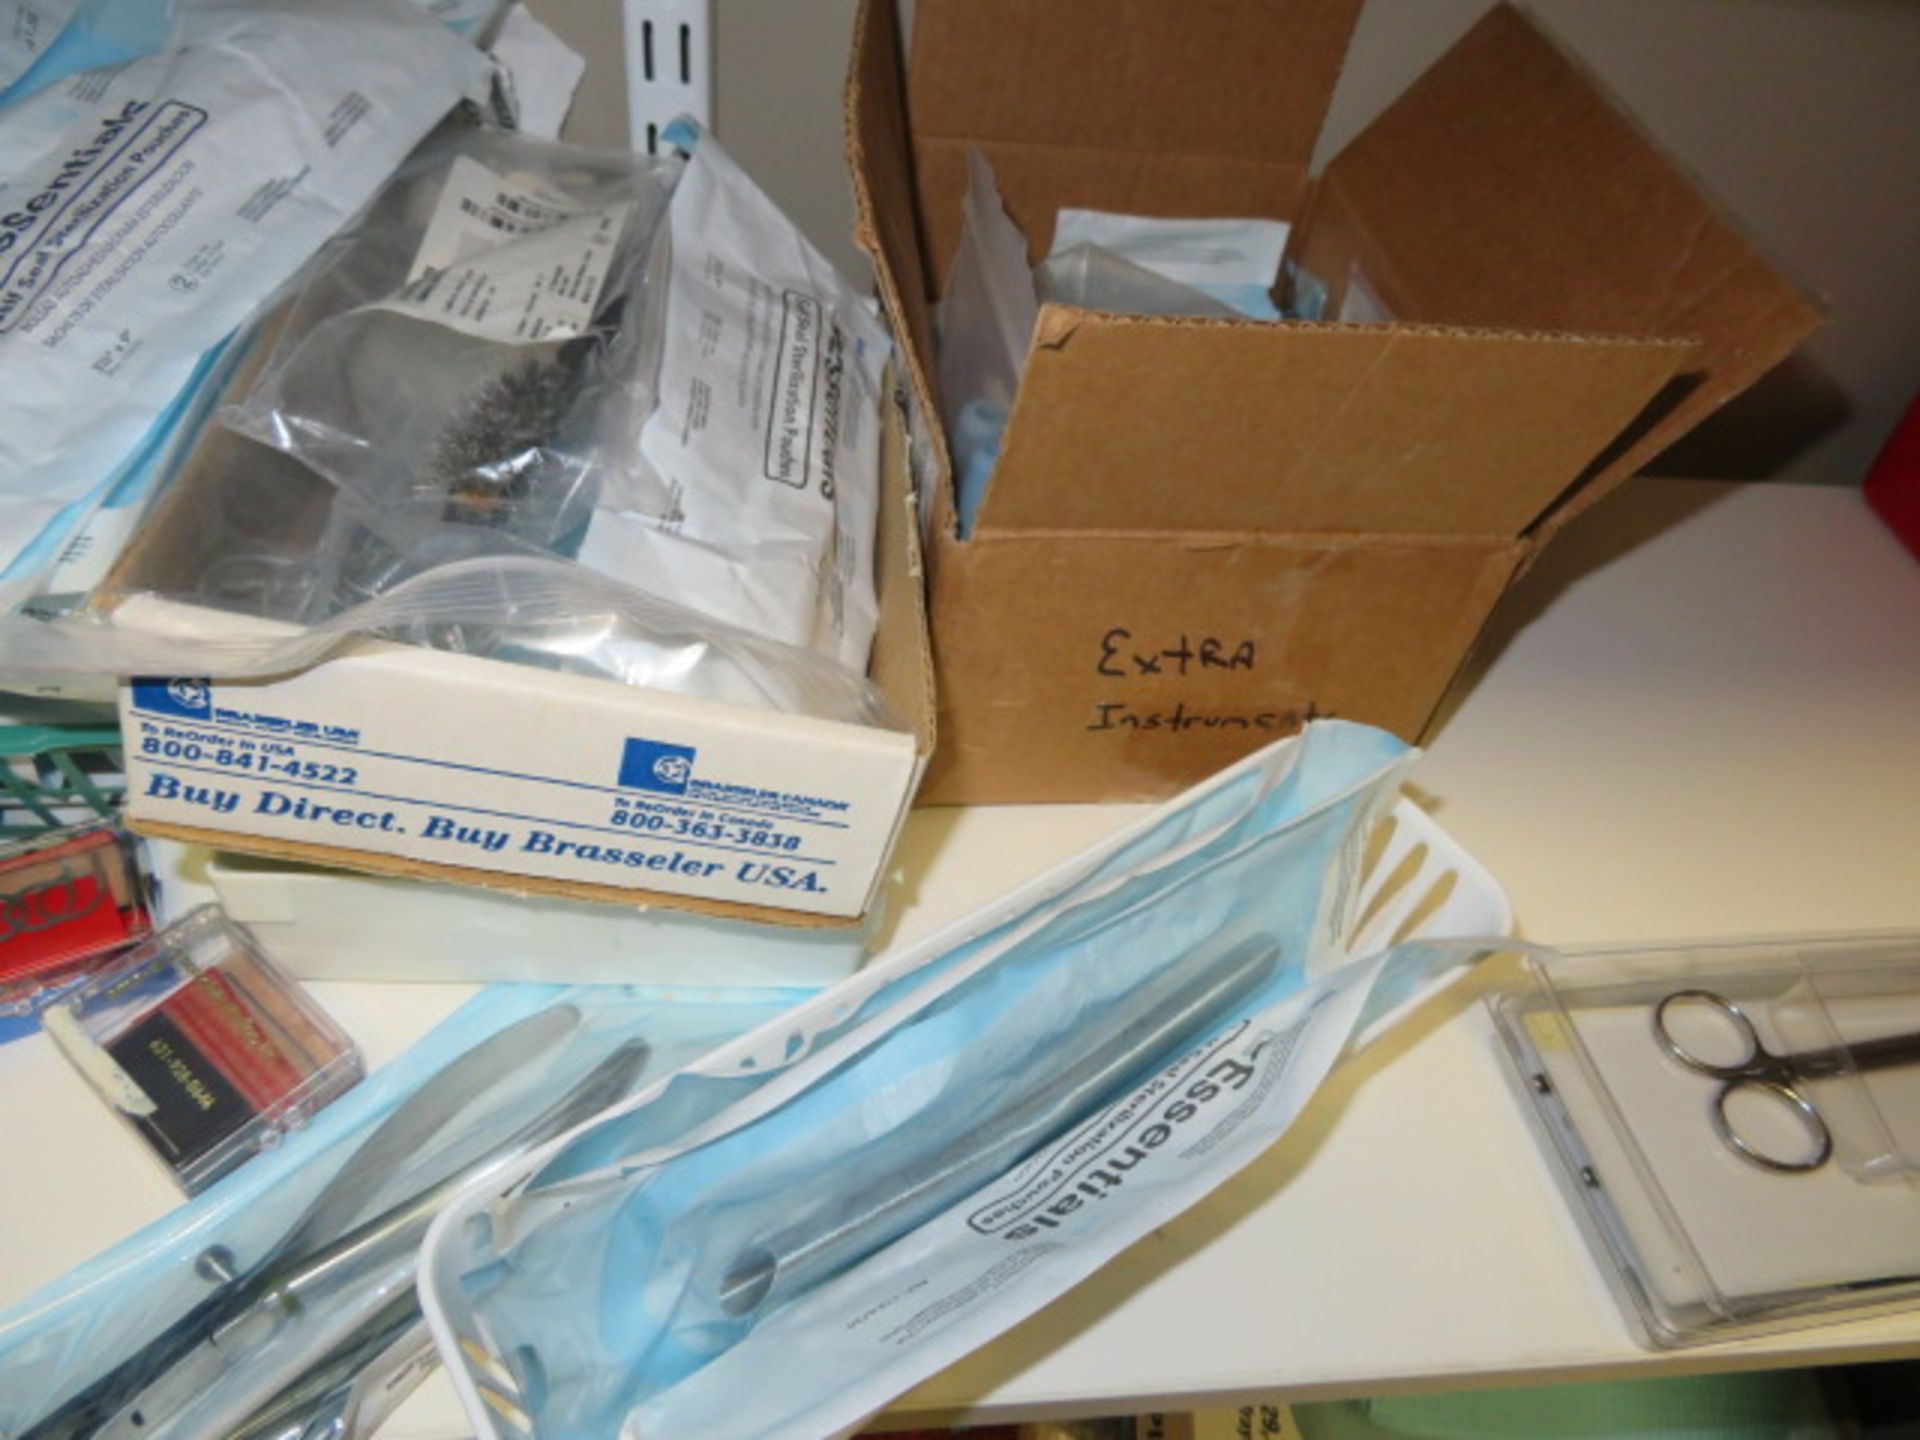 LARGE QTY DENTAL INSTRUMENTS, SPECIFIC OPERATORY PROCEDURE TRAYS, ASSORTED IMPRESSION MATERIAL... - Image 11 of 14